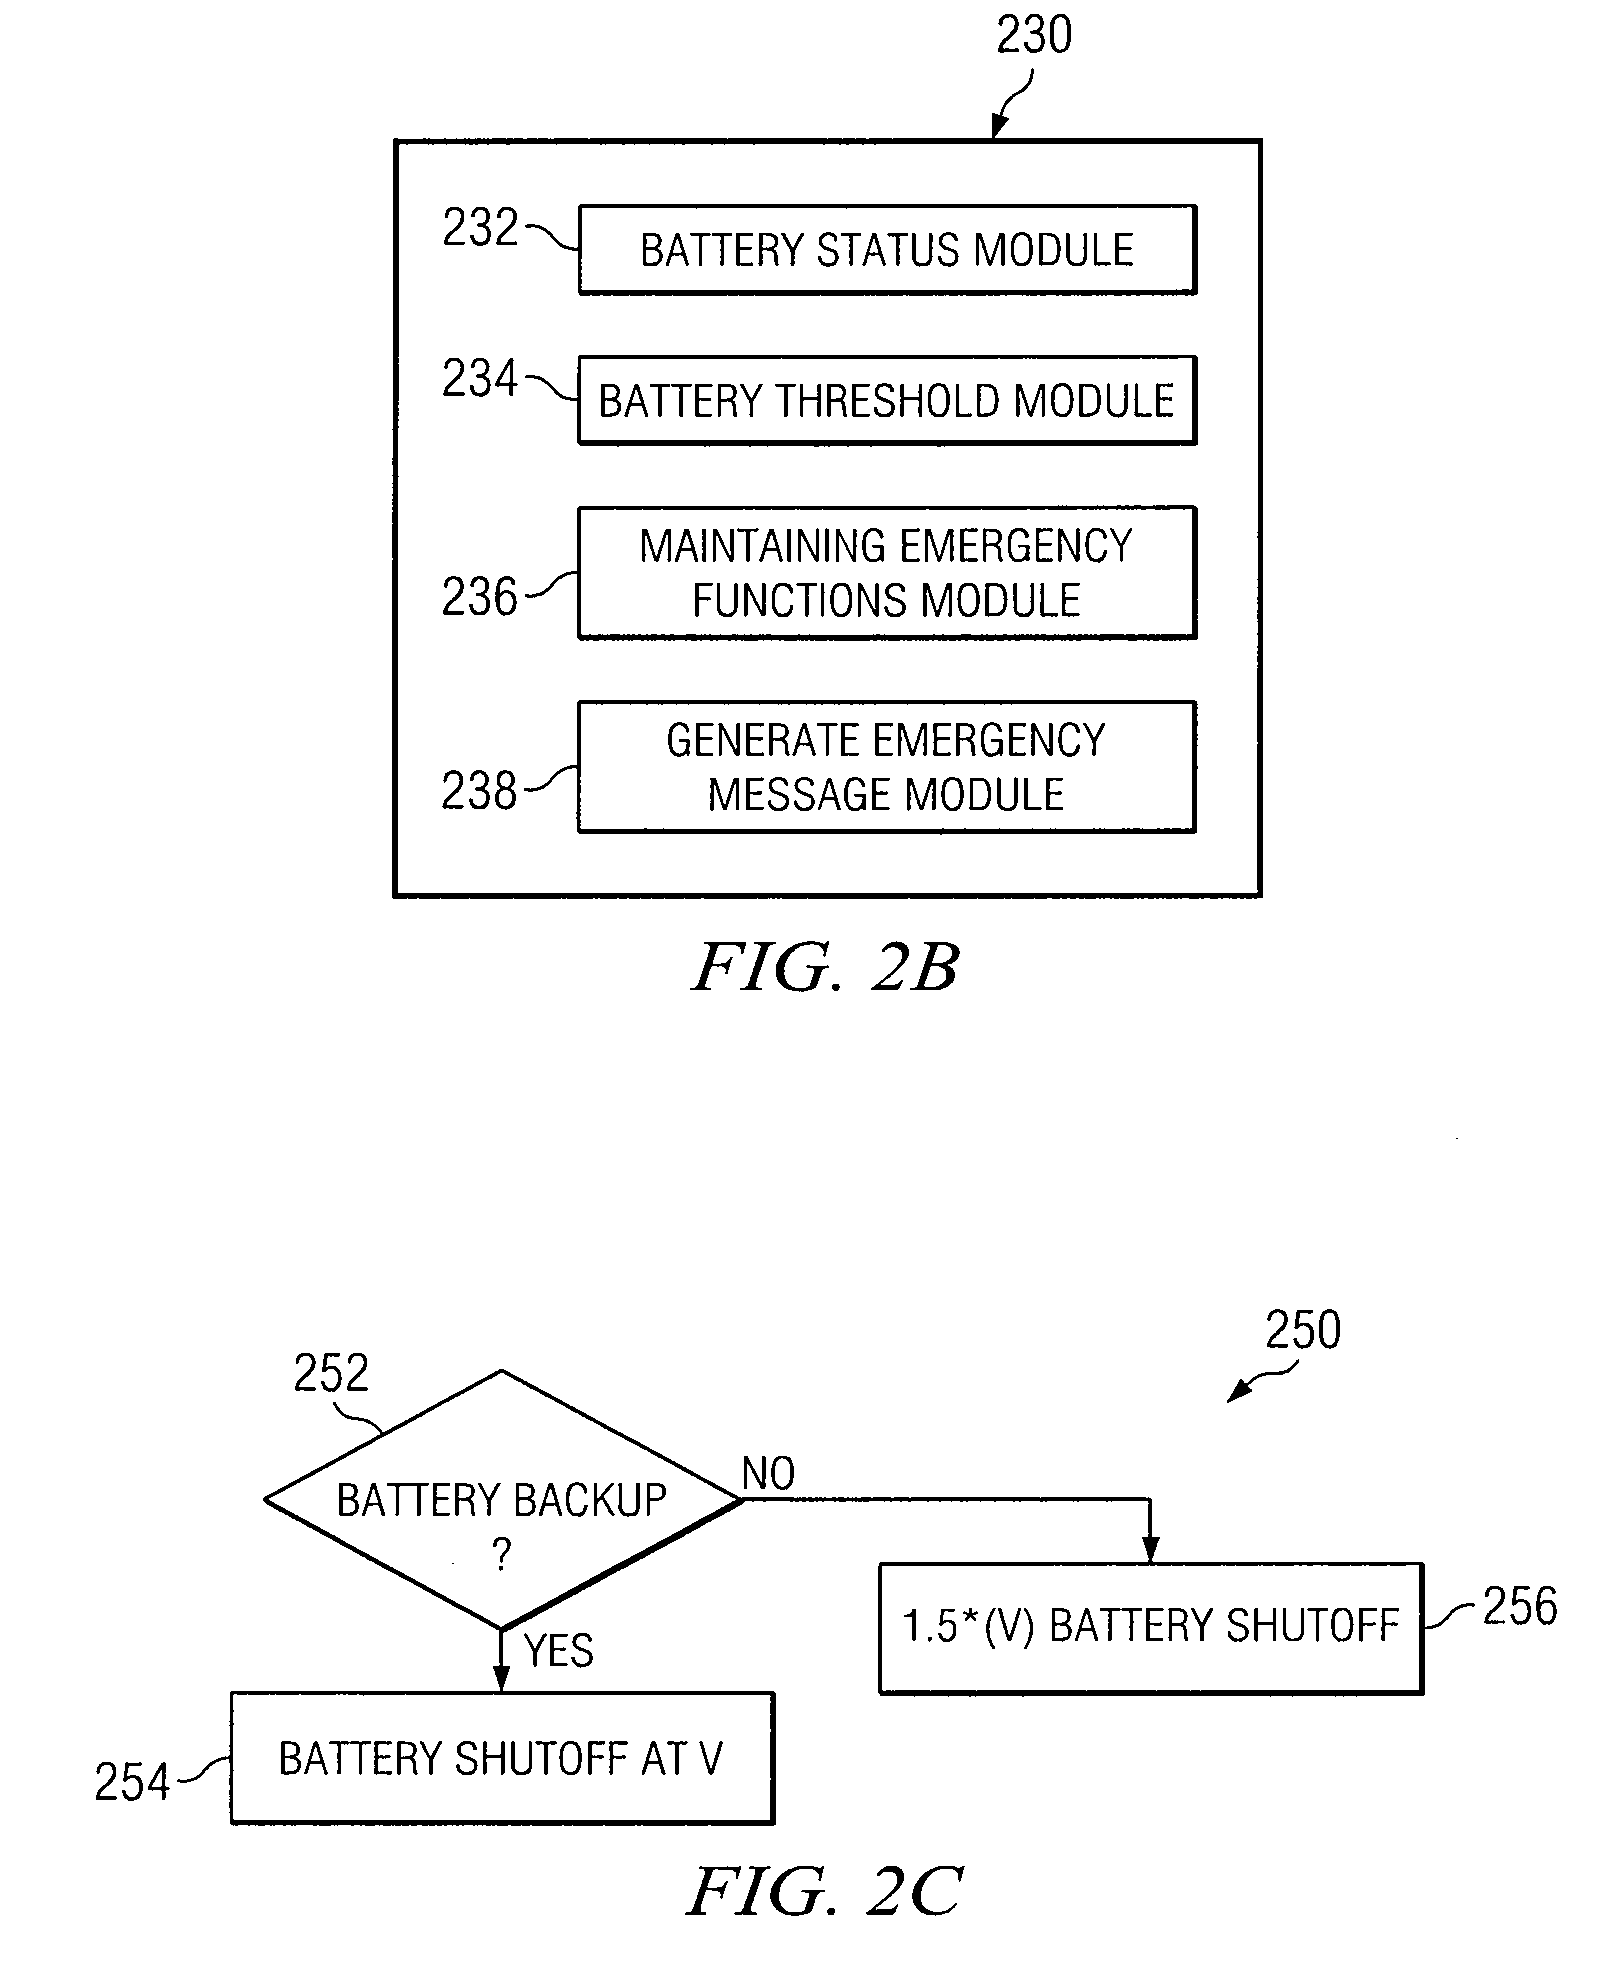 Battery charge reservation for emergency communications